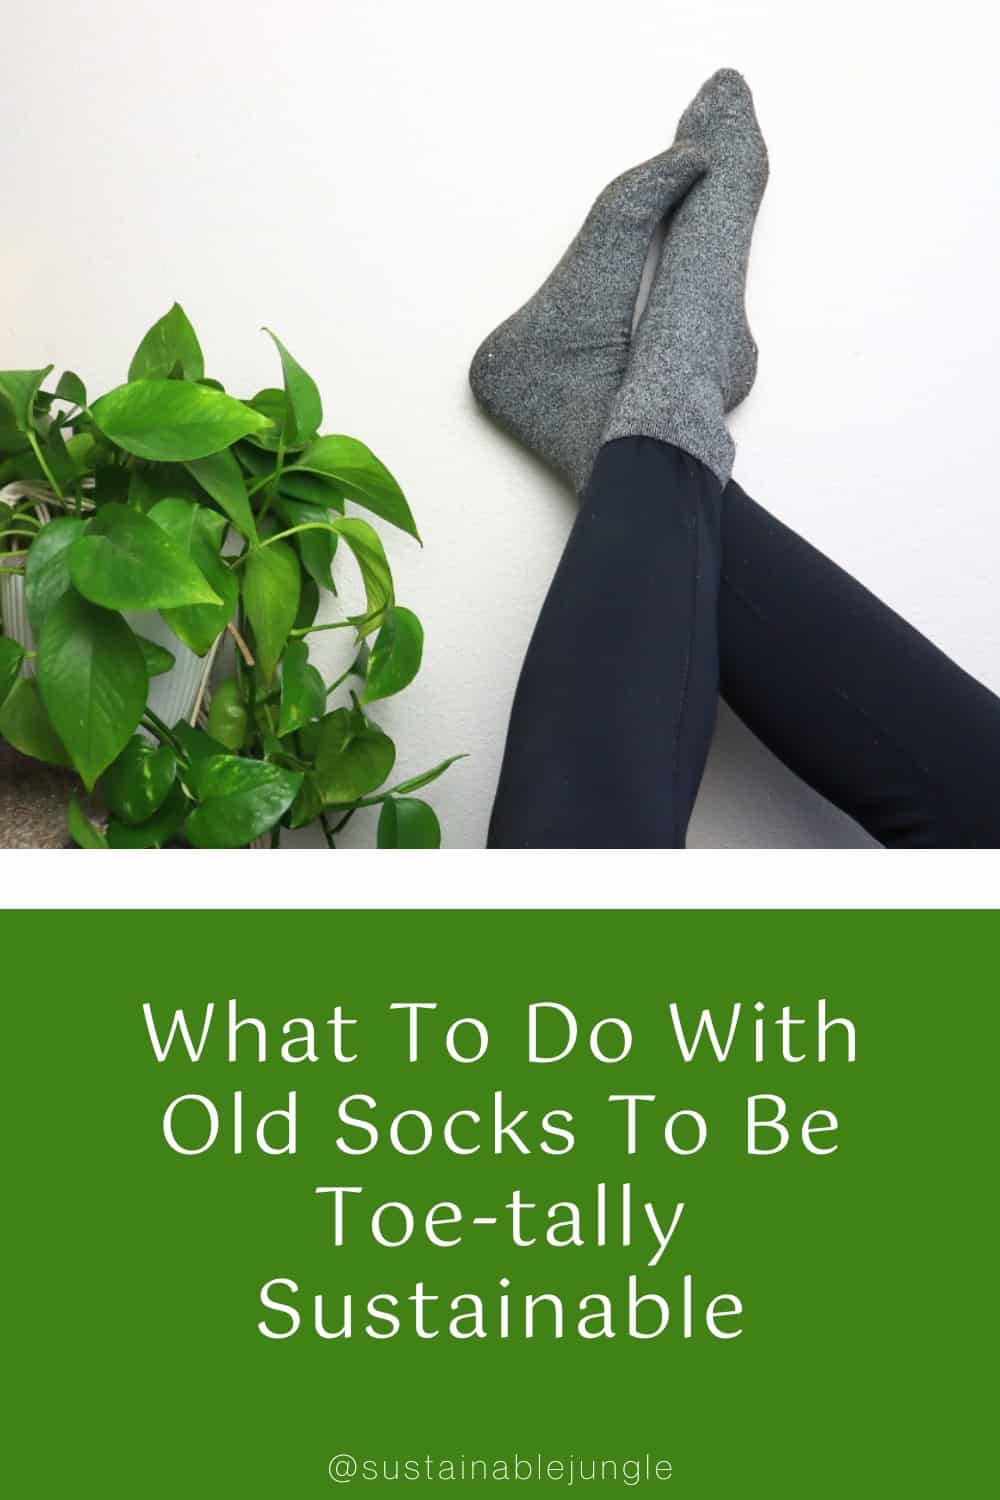 What To Do With Old Socks To Be Toe-tally Sustainable Image by Sustainable Jungle #whattodowitholdsocks #usesforoldsocks #recyclingoldsocks #howtorecycleoldsocks #reuseoldsocks #whattodowithholeysocks #sustainablejungle